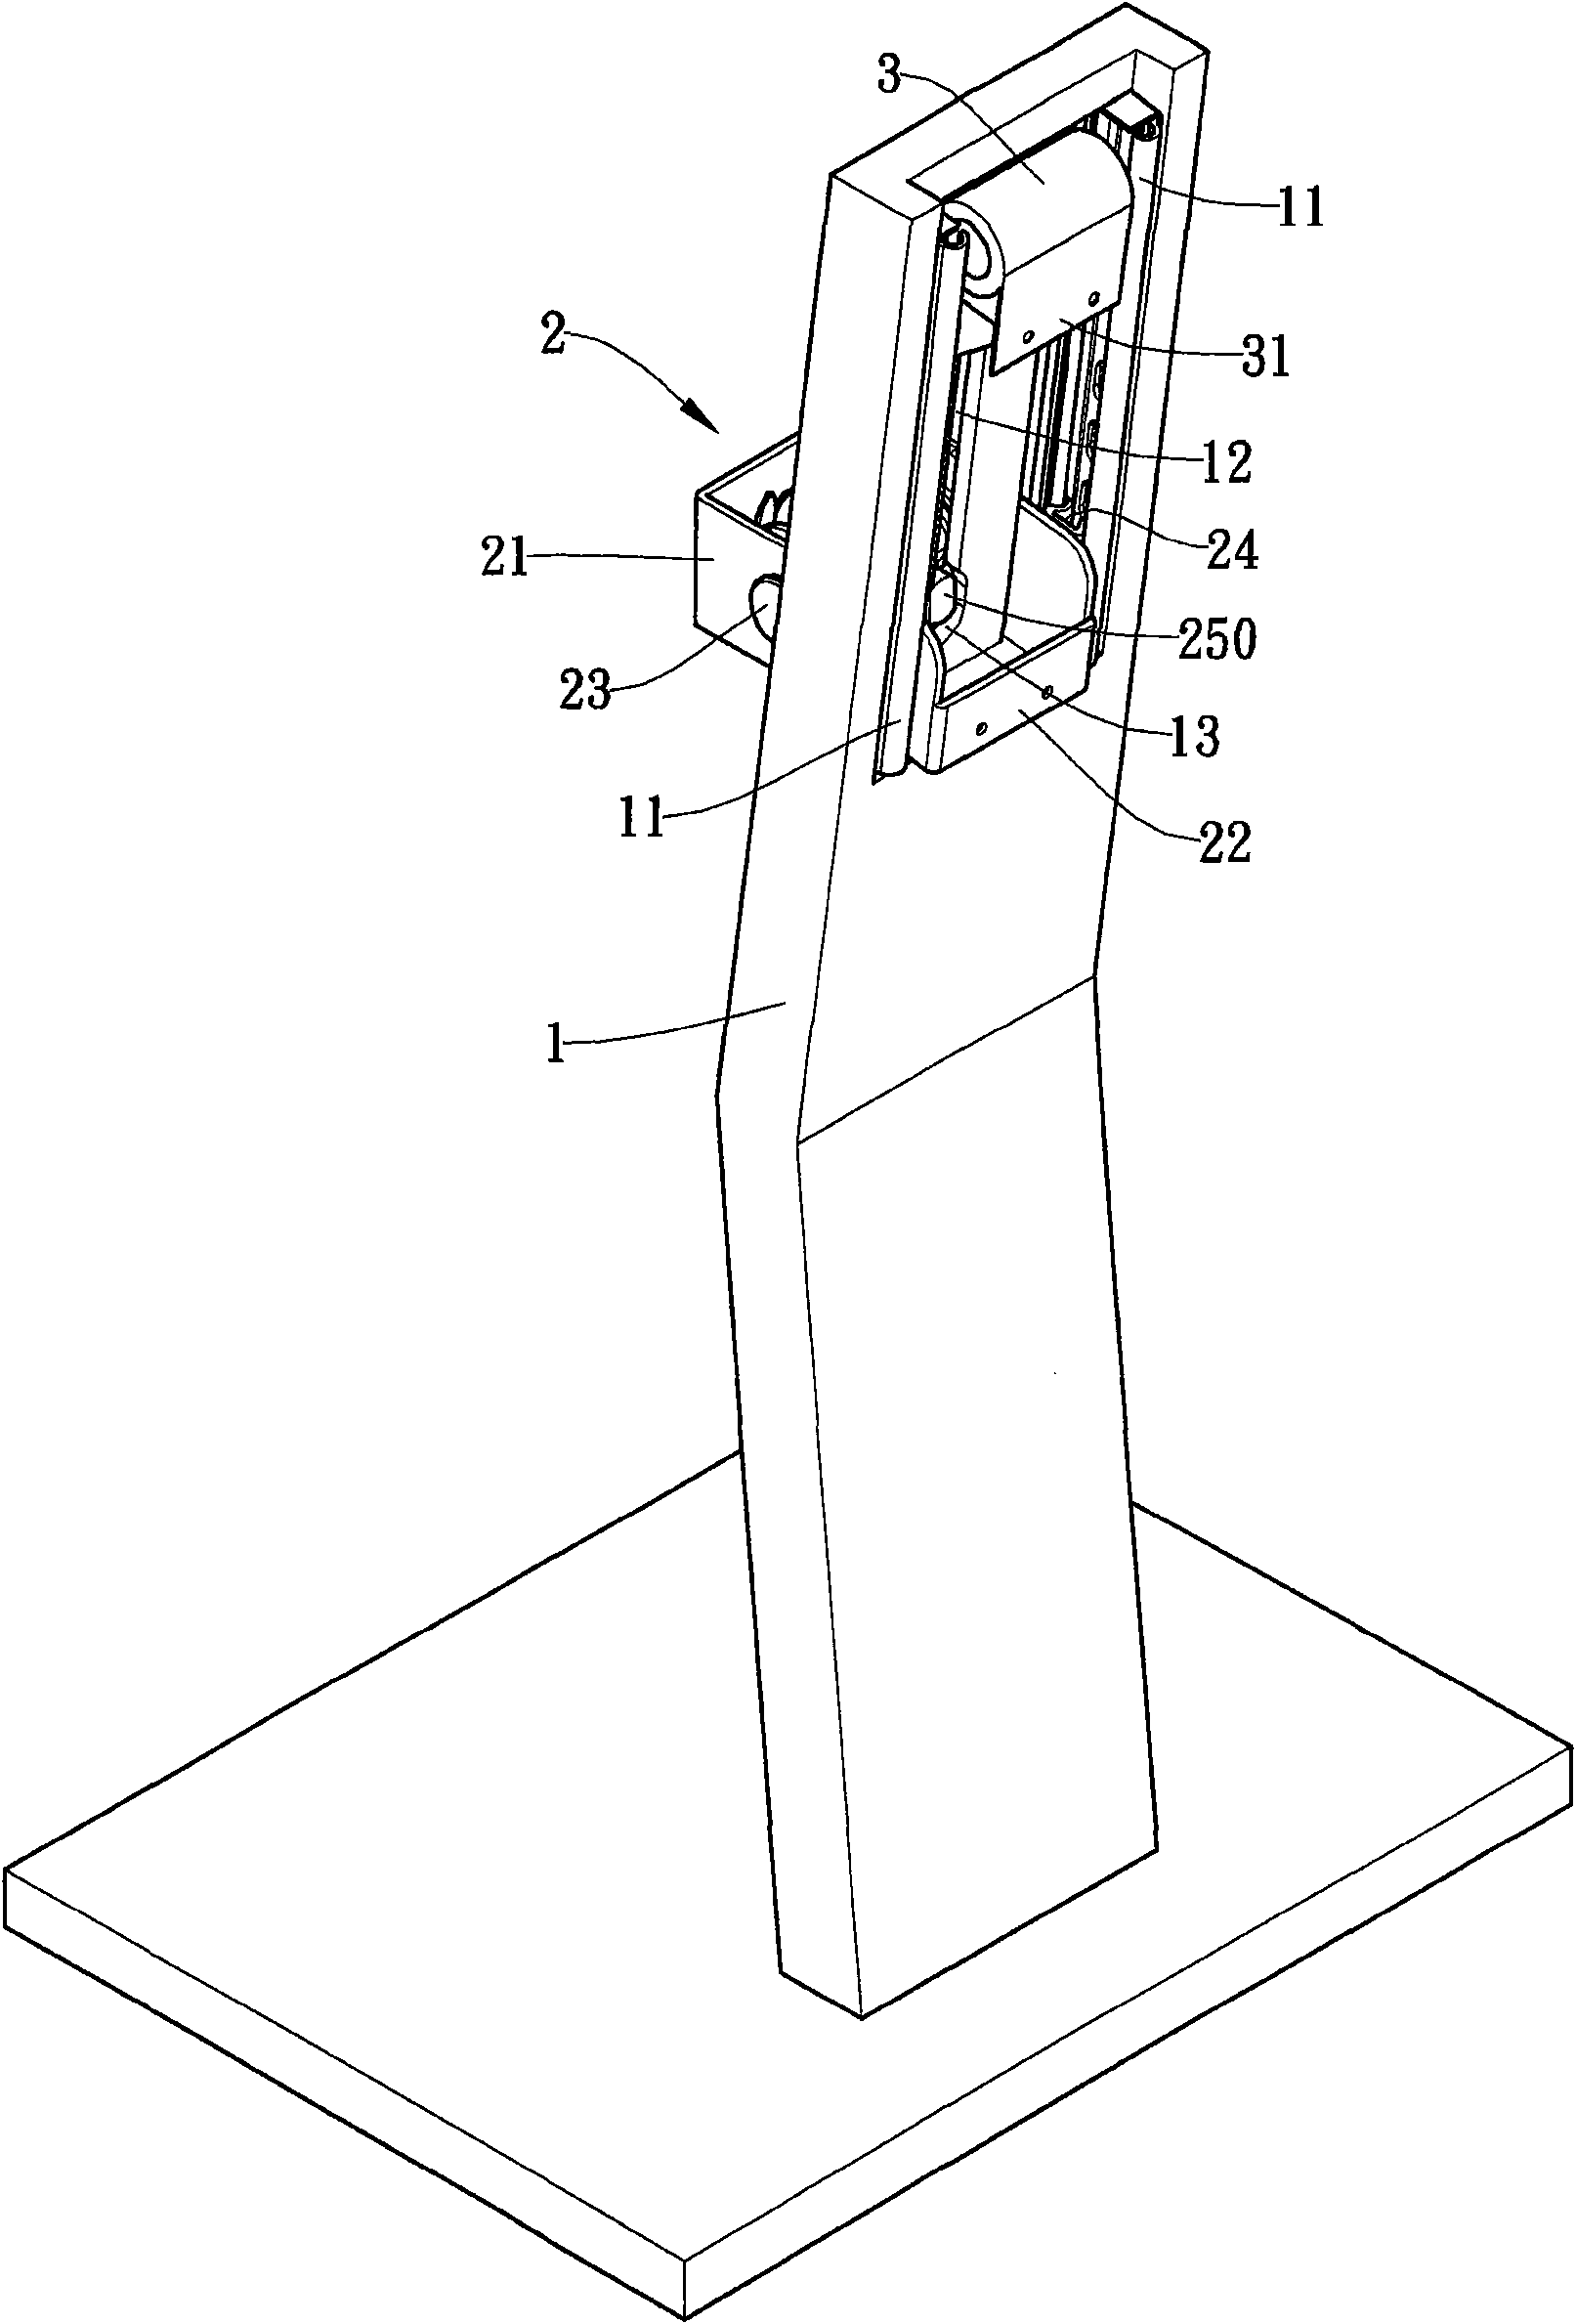 Support frame capable of realizing interlocking of screen rotation and height adjustment